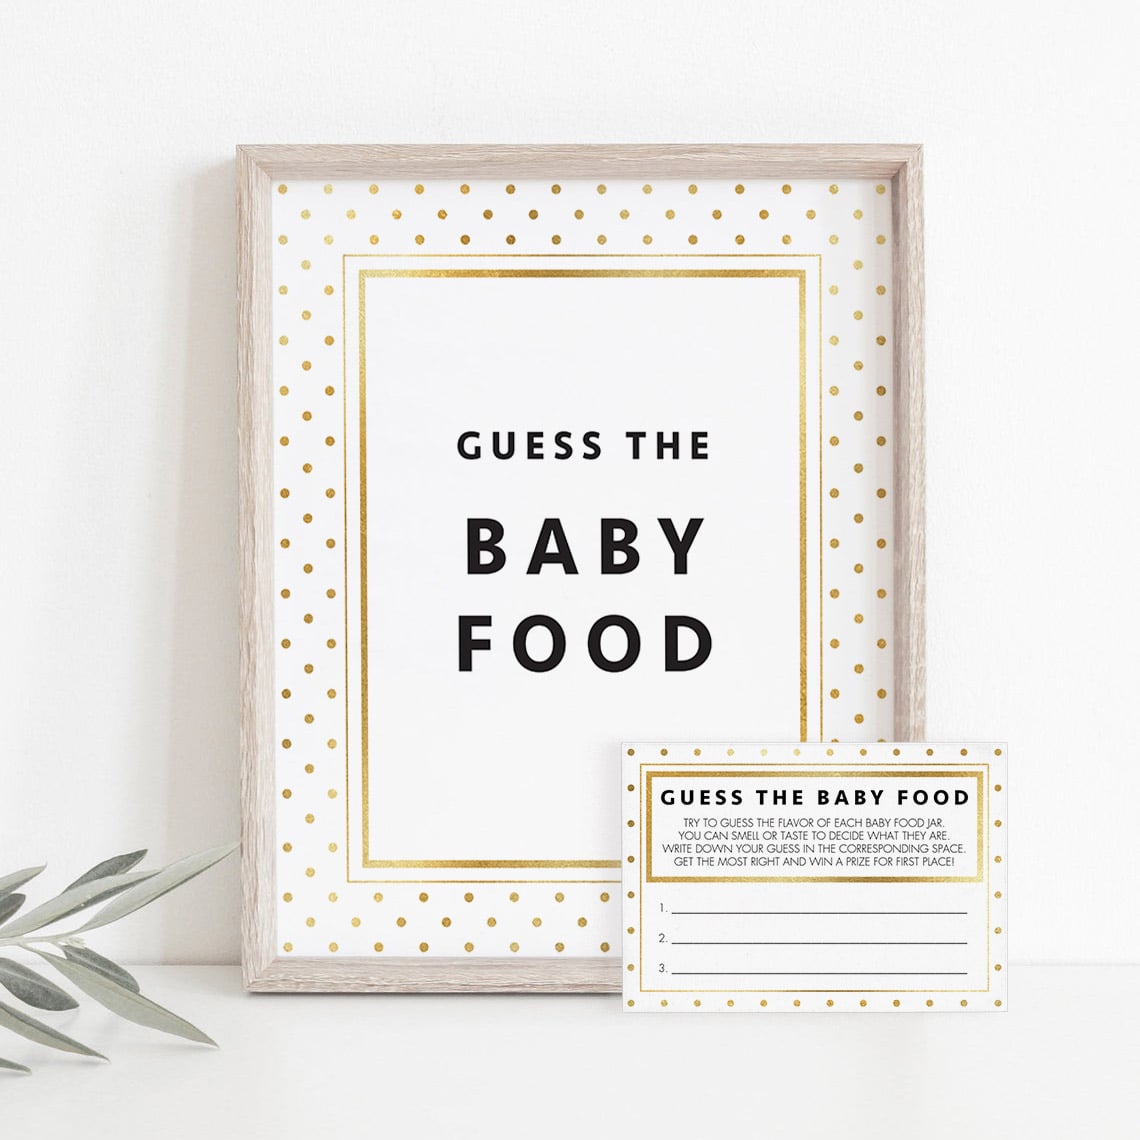 Printable guess the baby food flavor game for gold baby shower by LittleSizzle